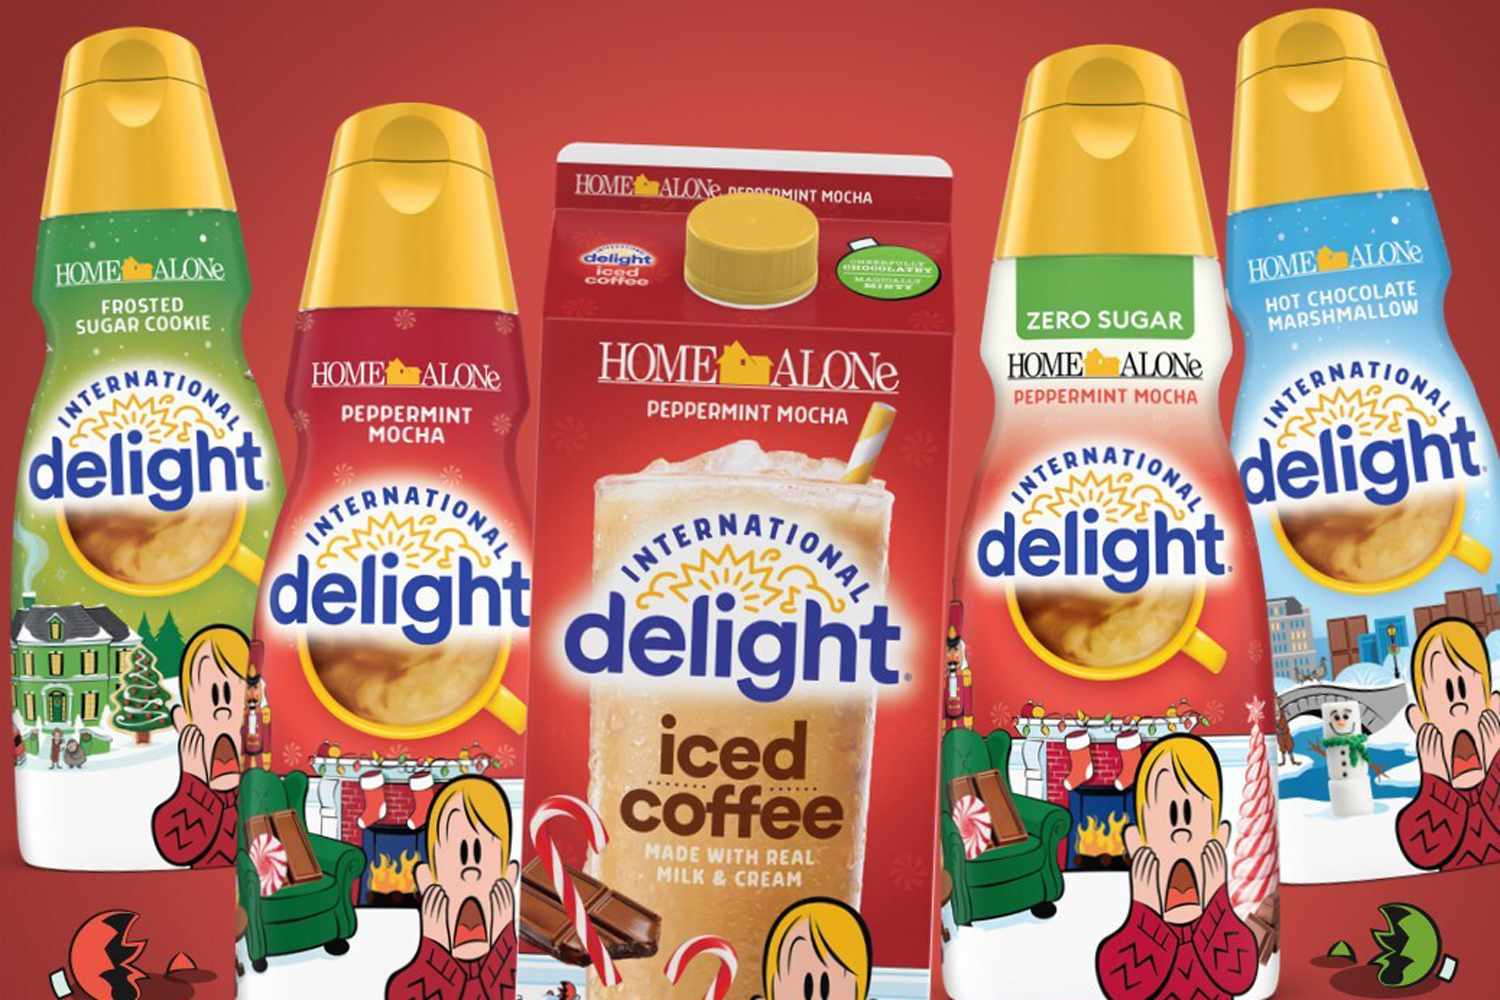 International Delight’s New Home Alone Holiday Products Are Available Now (Yes, Already)